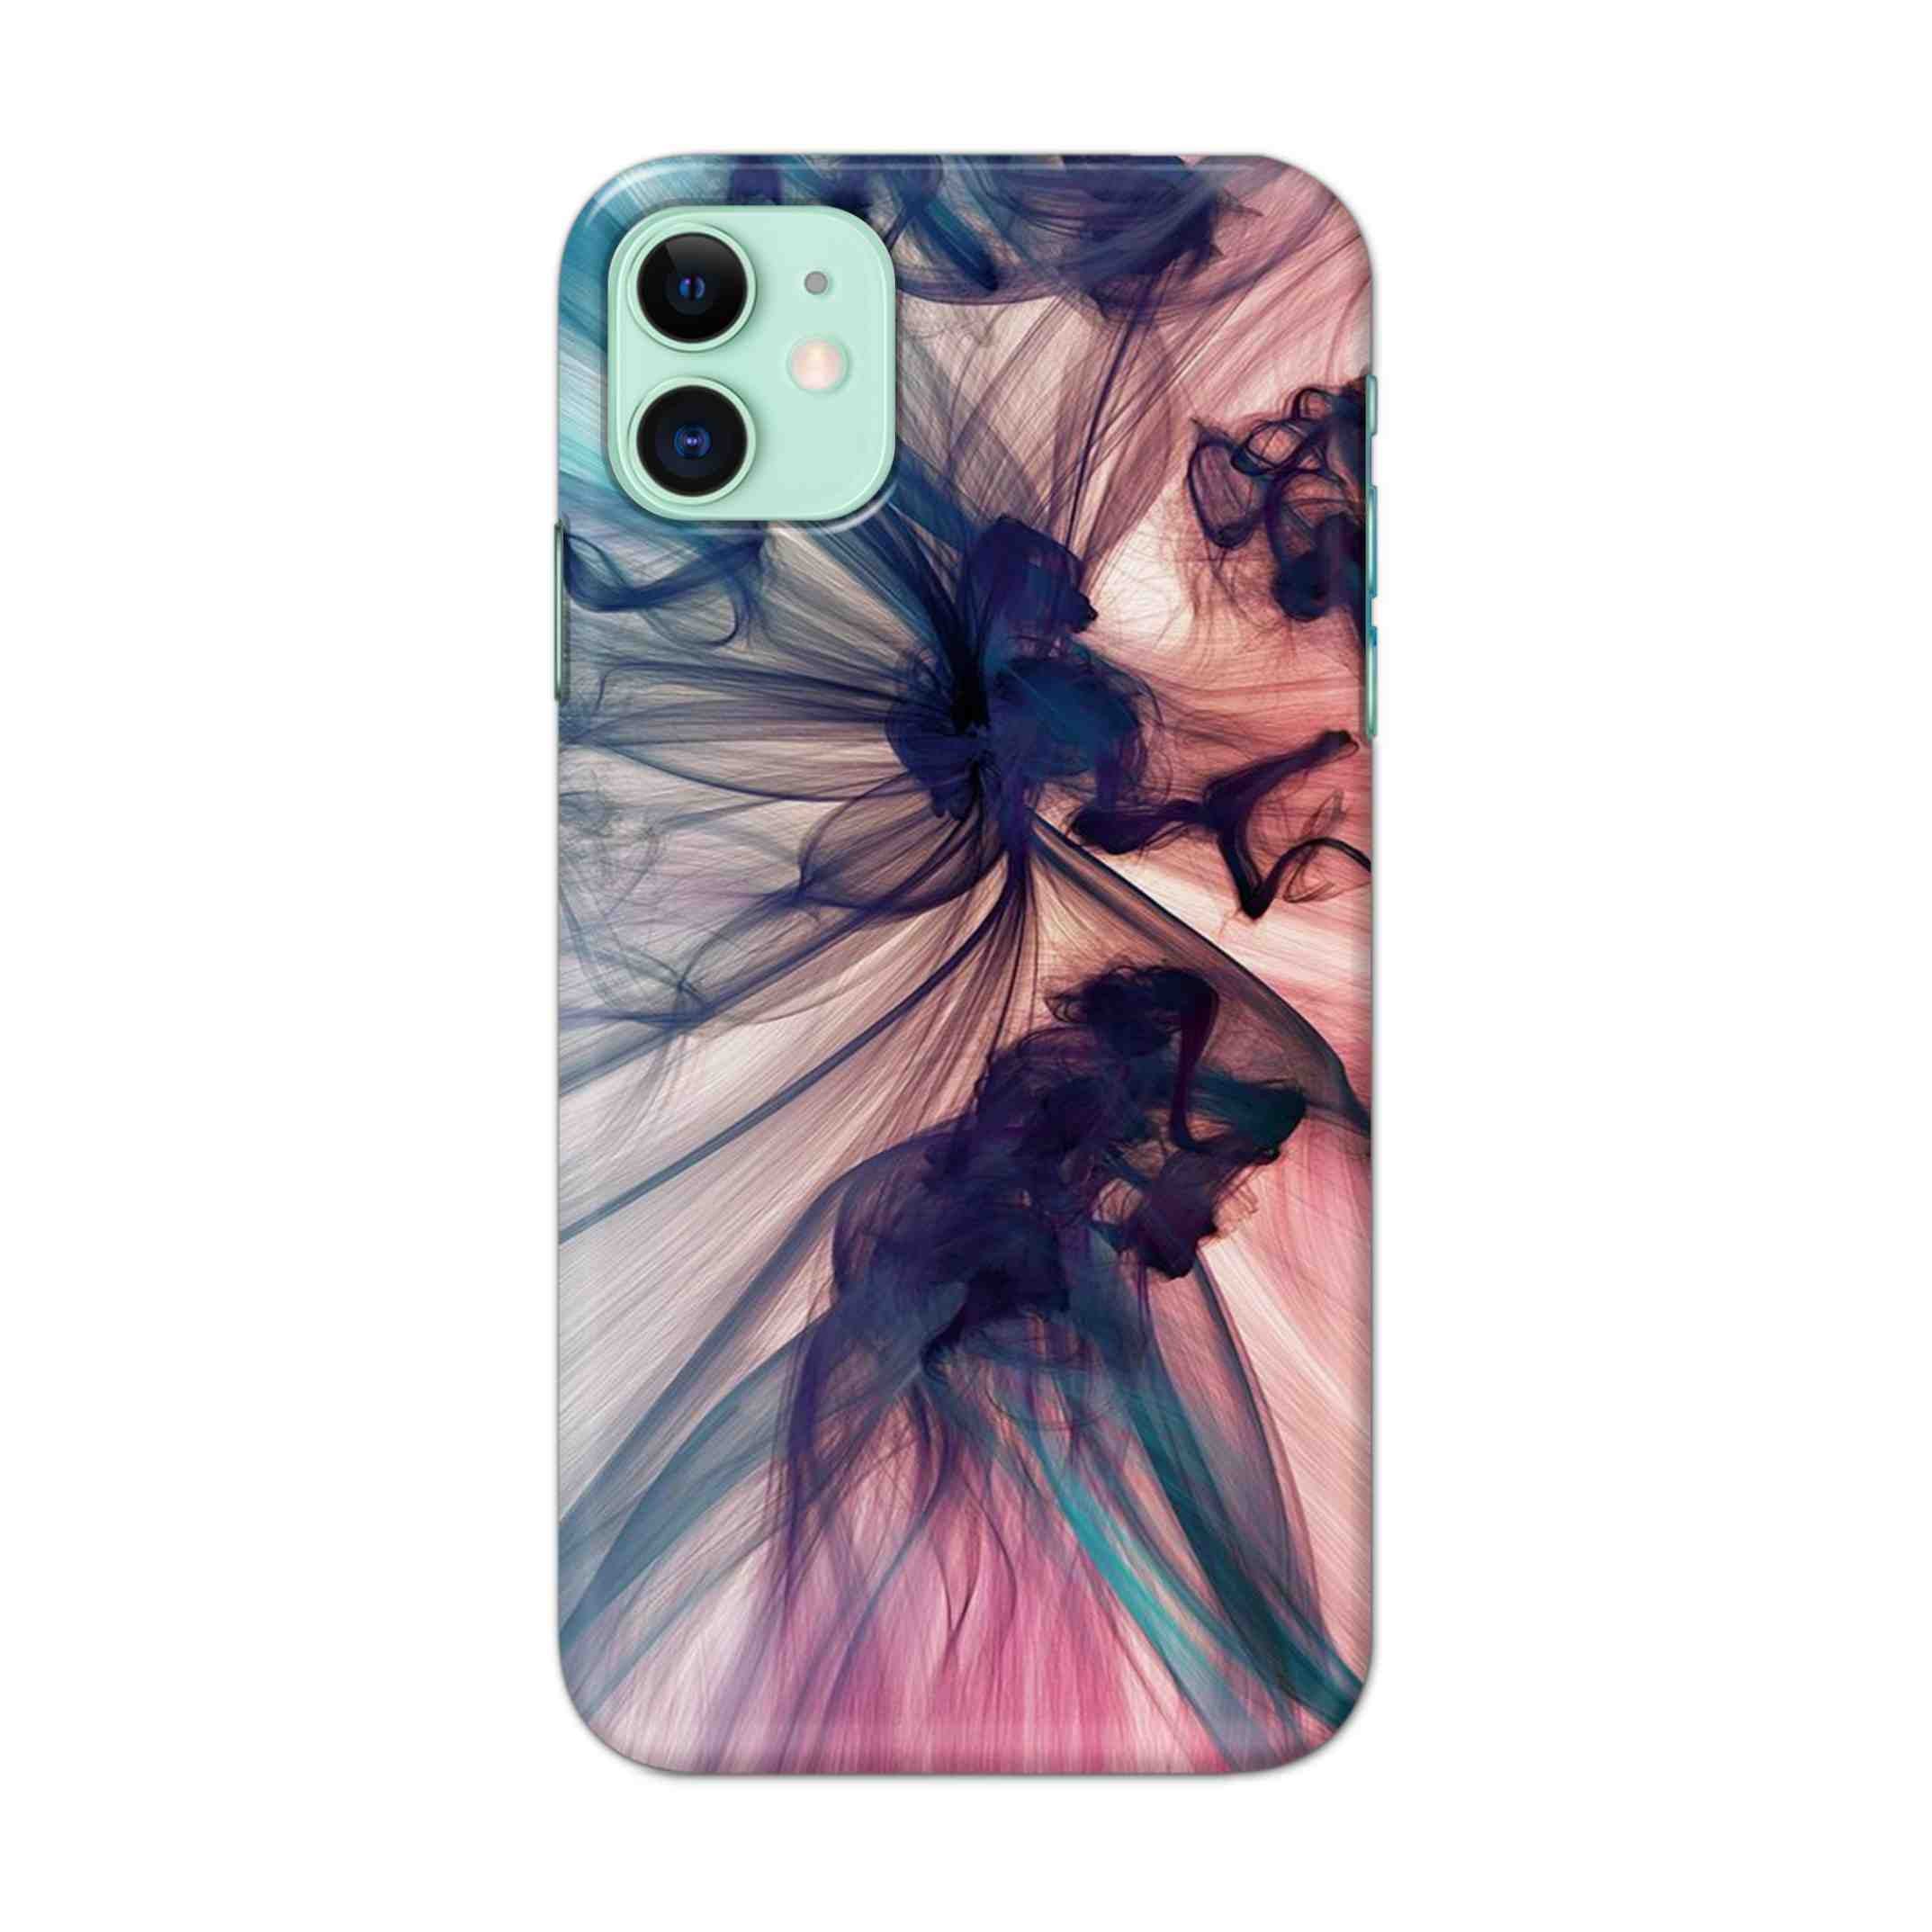 Buy Colourful Texture Hard Back Mobile Phone Case Cover For iPhone 11 Online